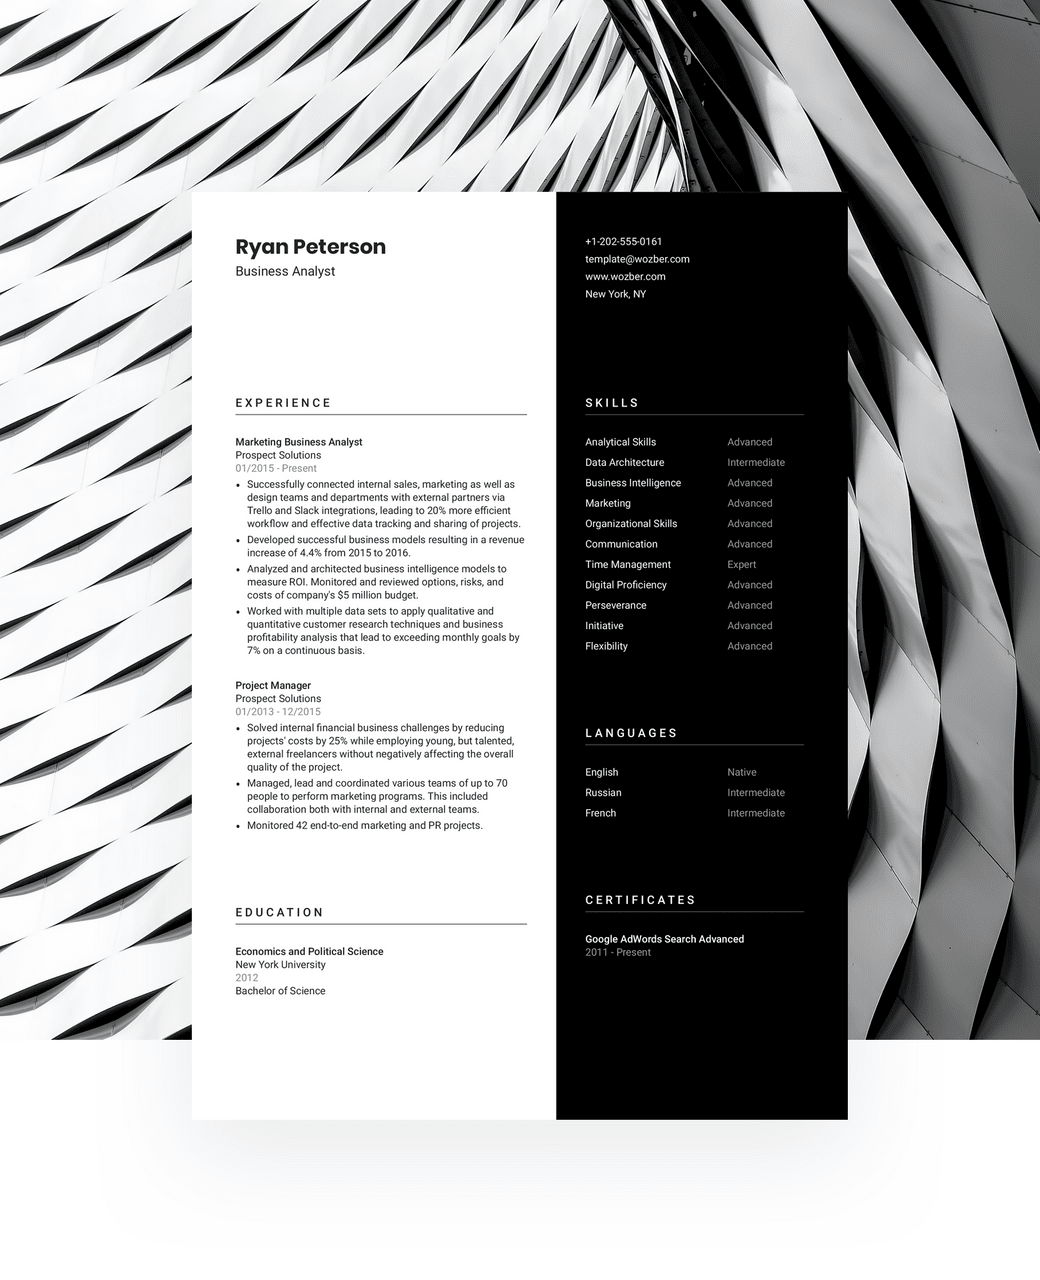 A black and white creative resume template for those who seek a classic feel.